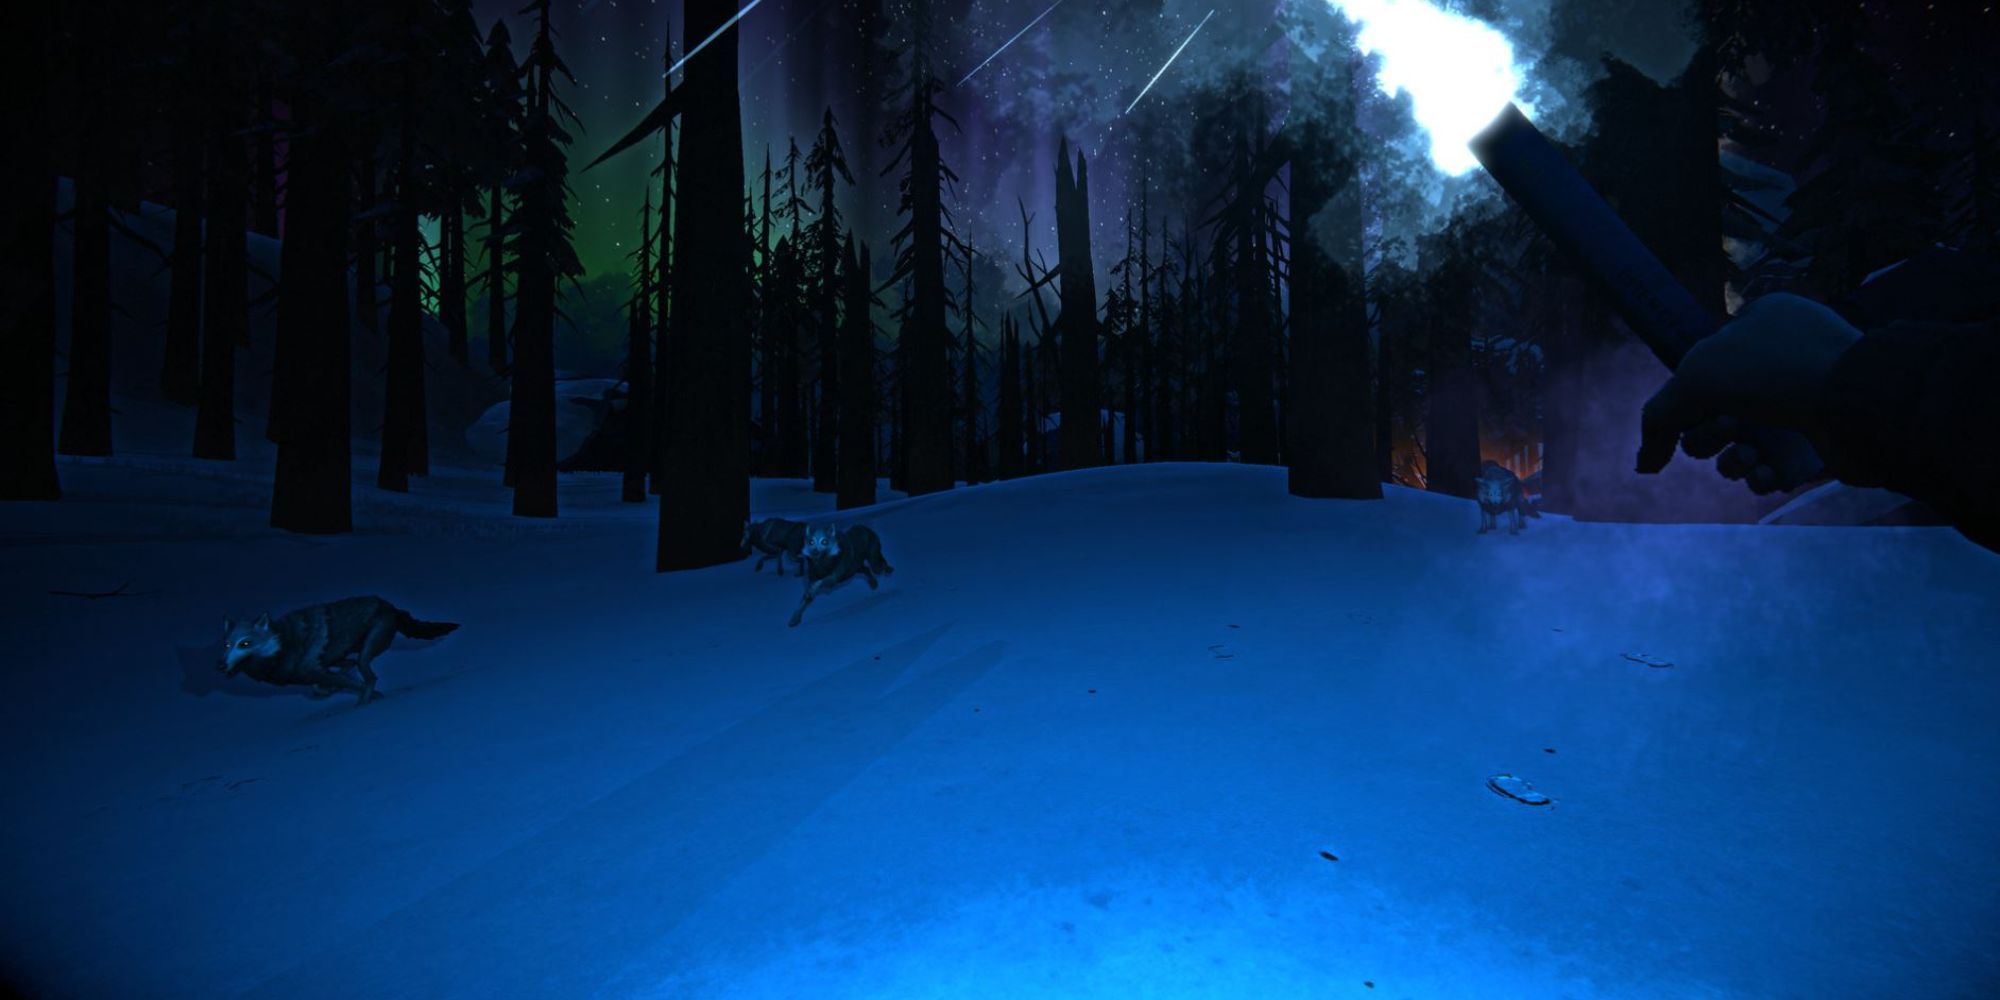 The Long Dark player holding a flare